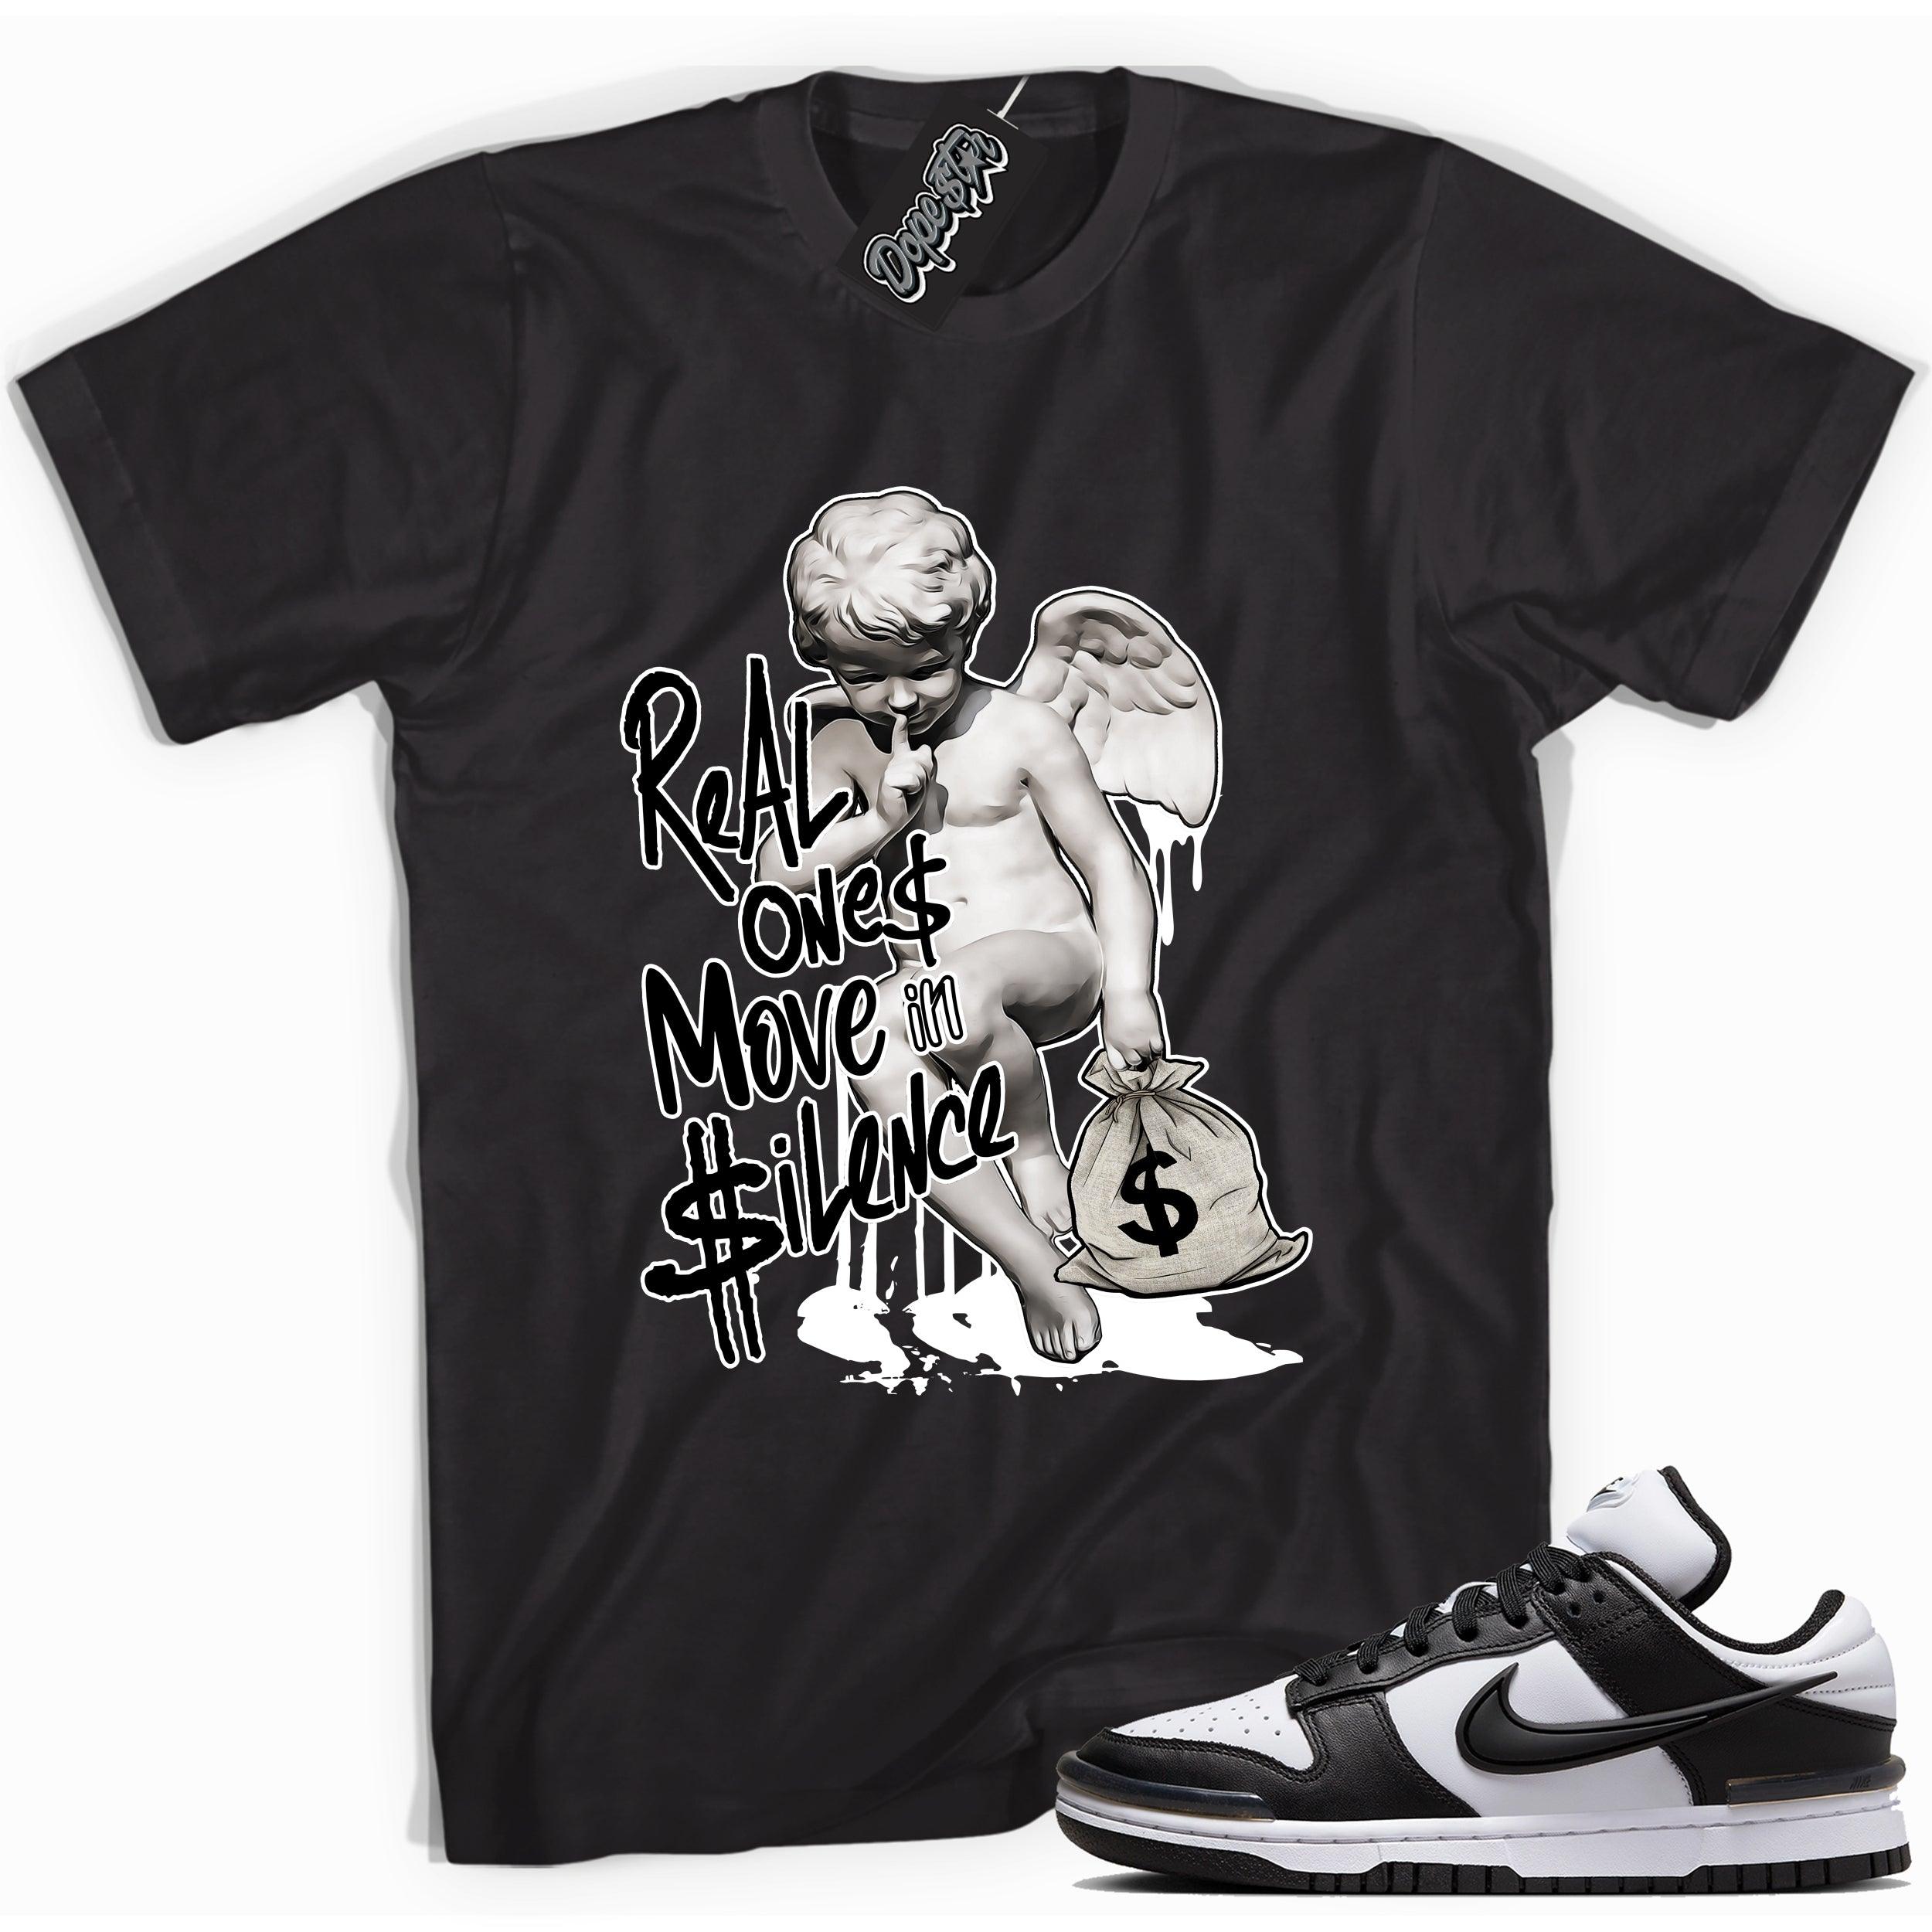 Cool black graphic tee with 'real ones move in silence' print, that perfectly matches Nike Dunk Low Twist Panda sneakers.